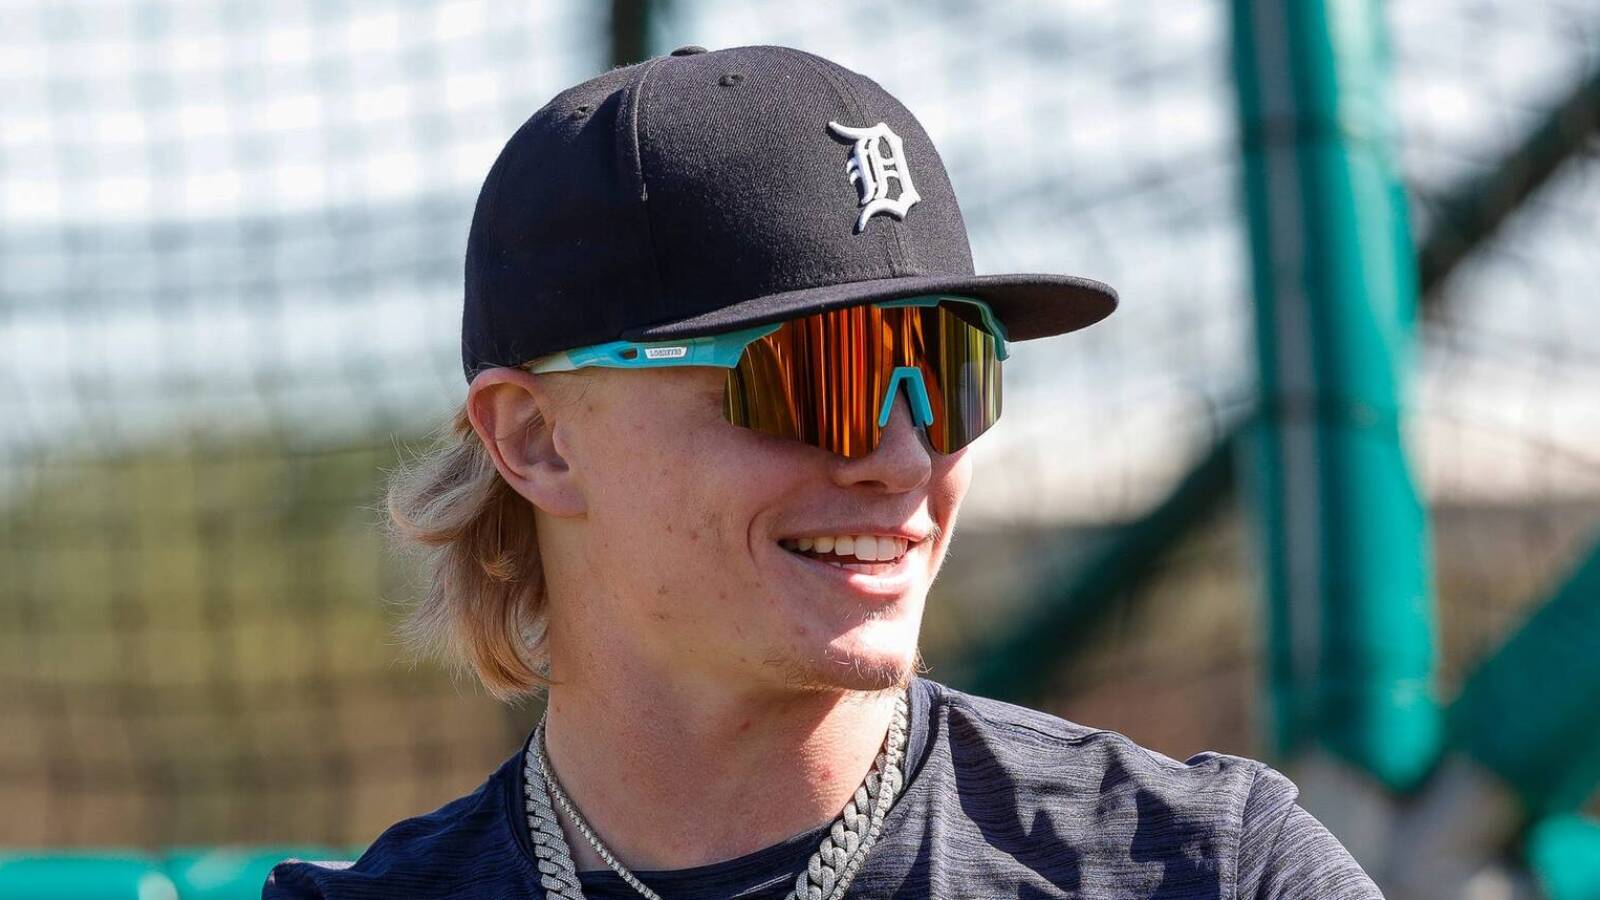 Tigers top prospect turns doubters into fashion statement